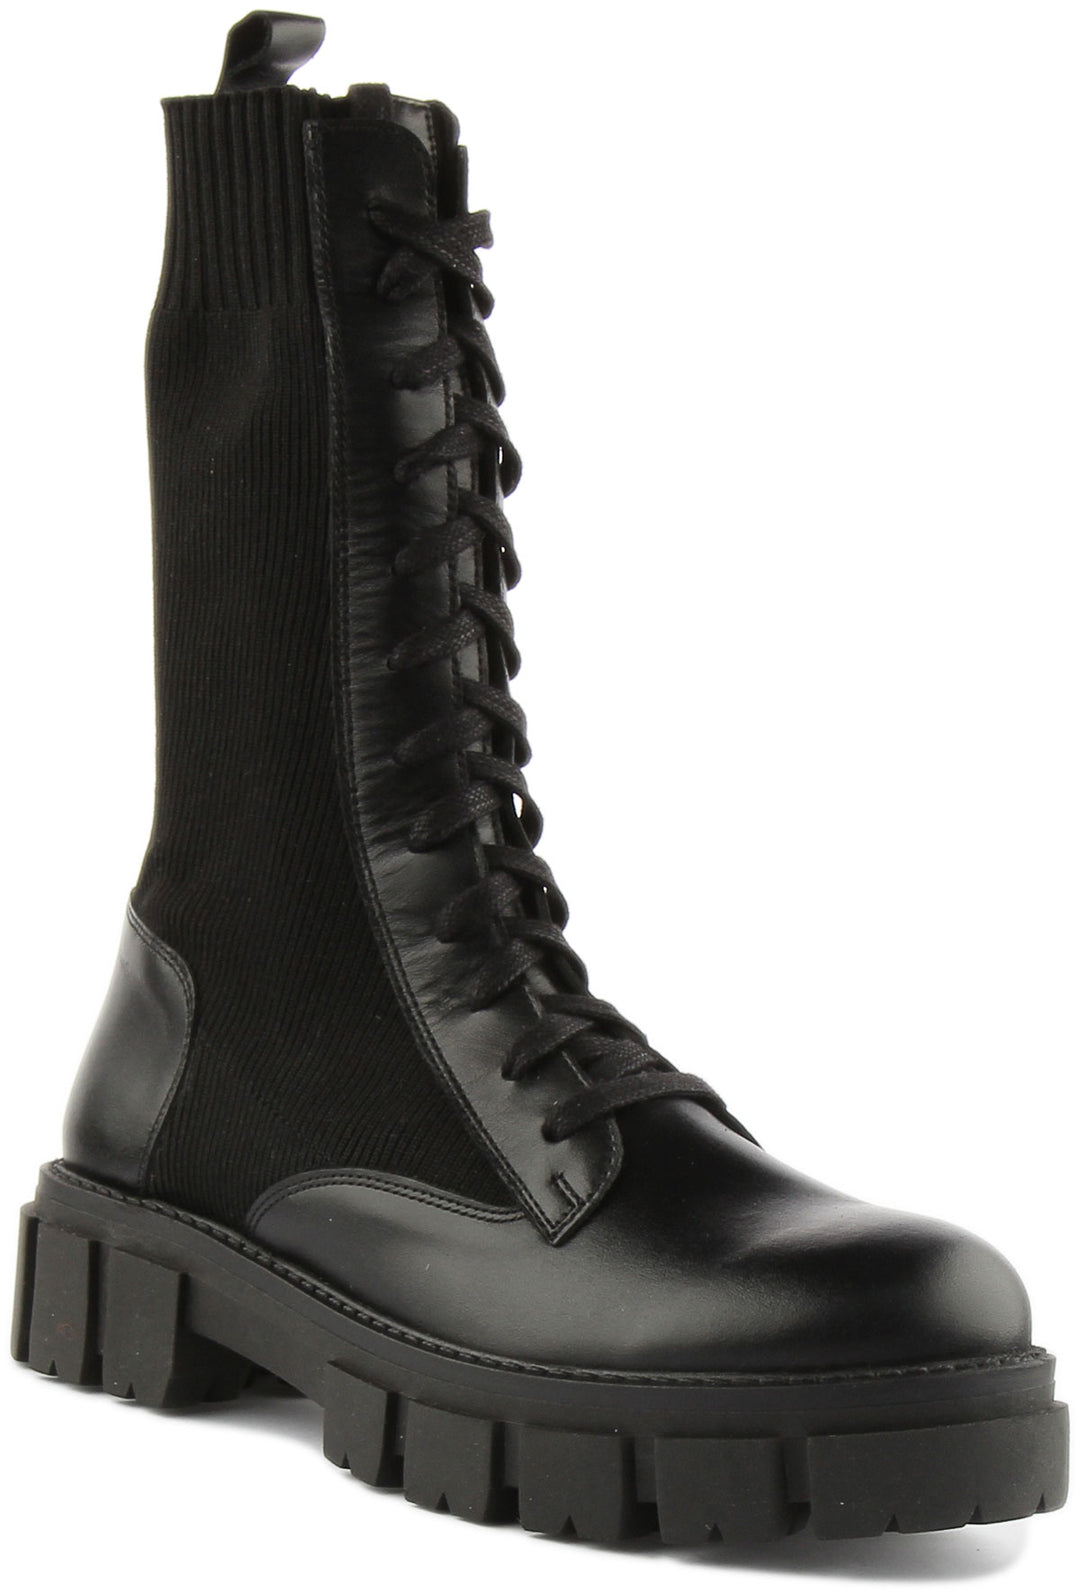 Justin Reece England Astera In Black For Women